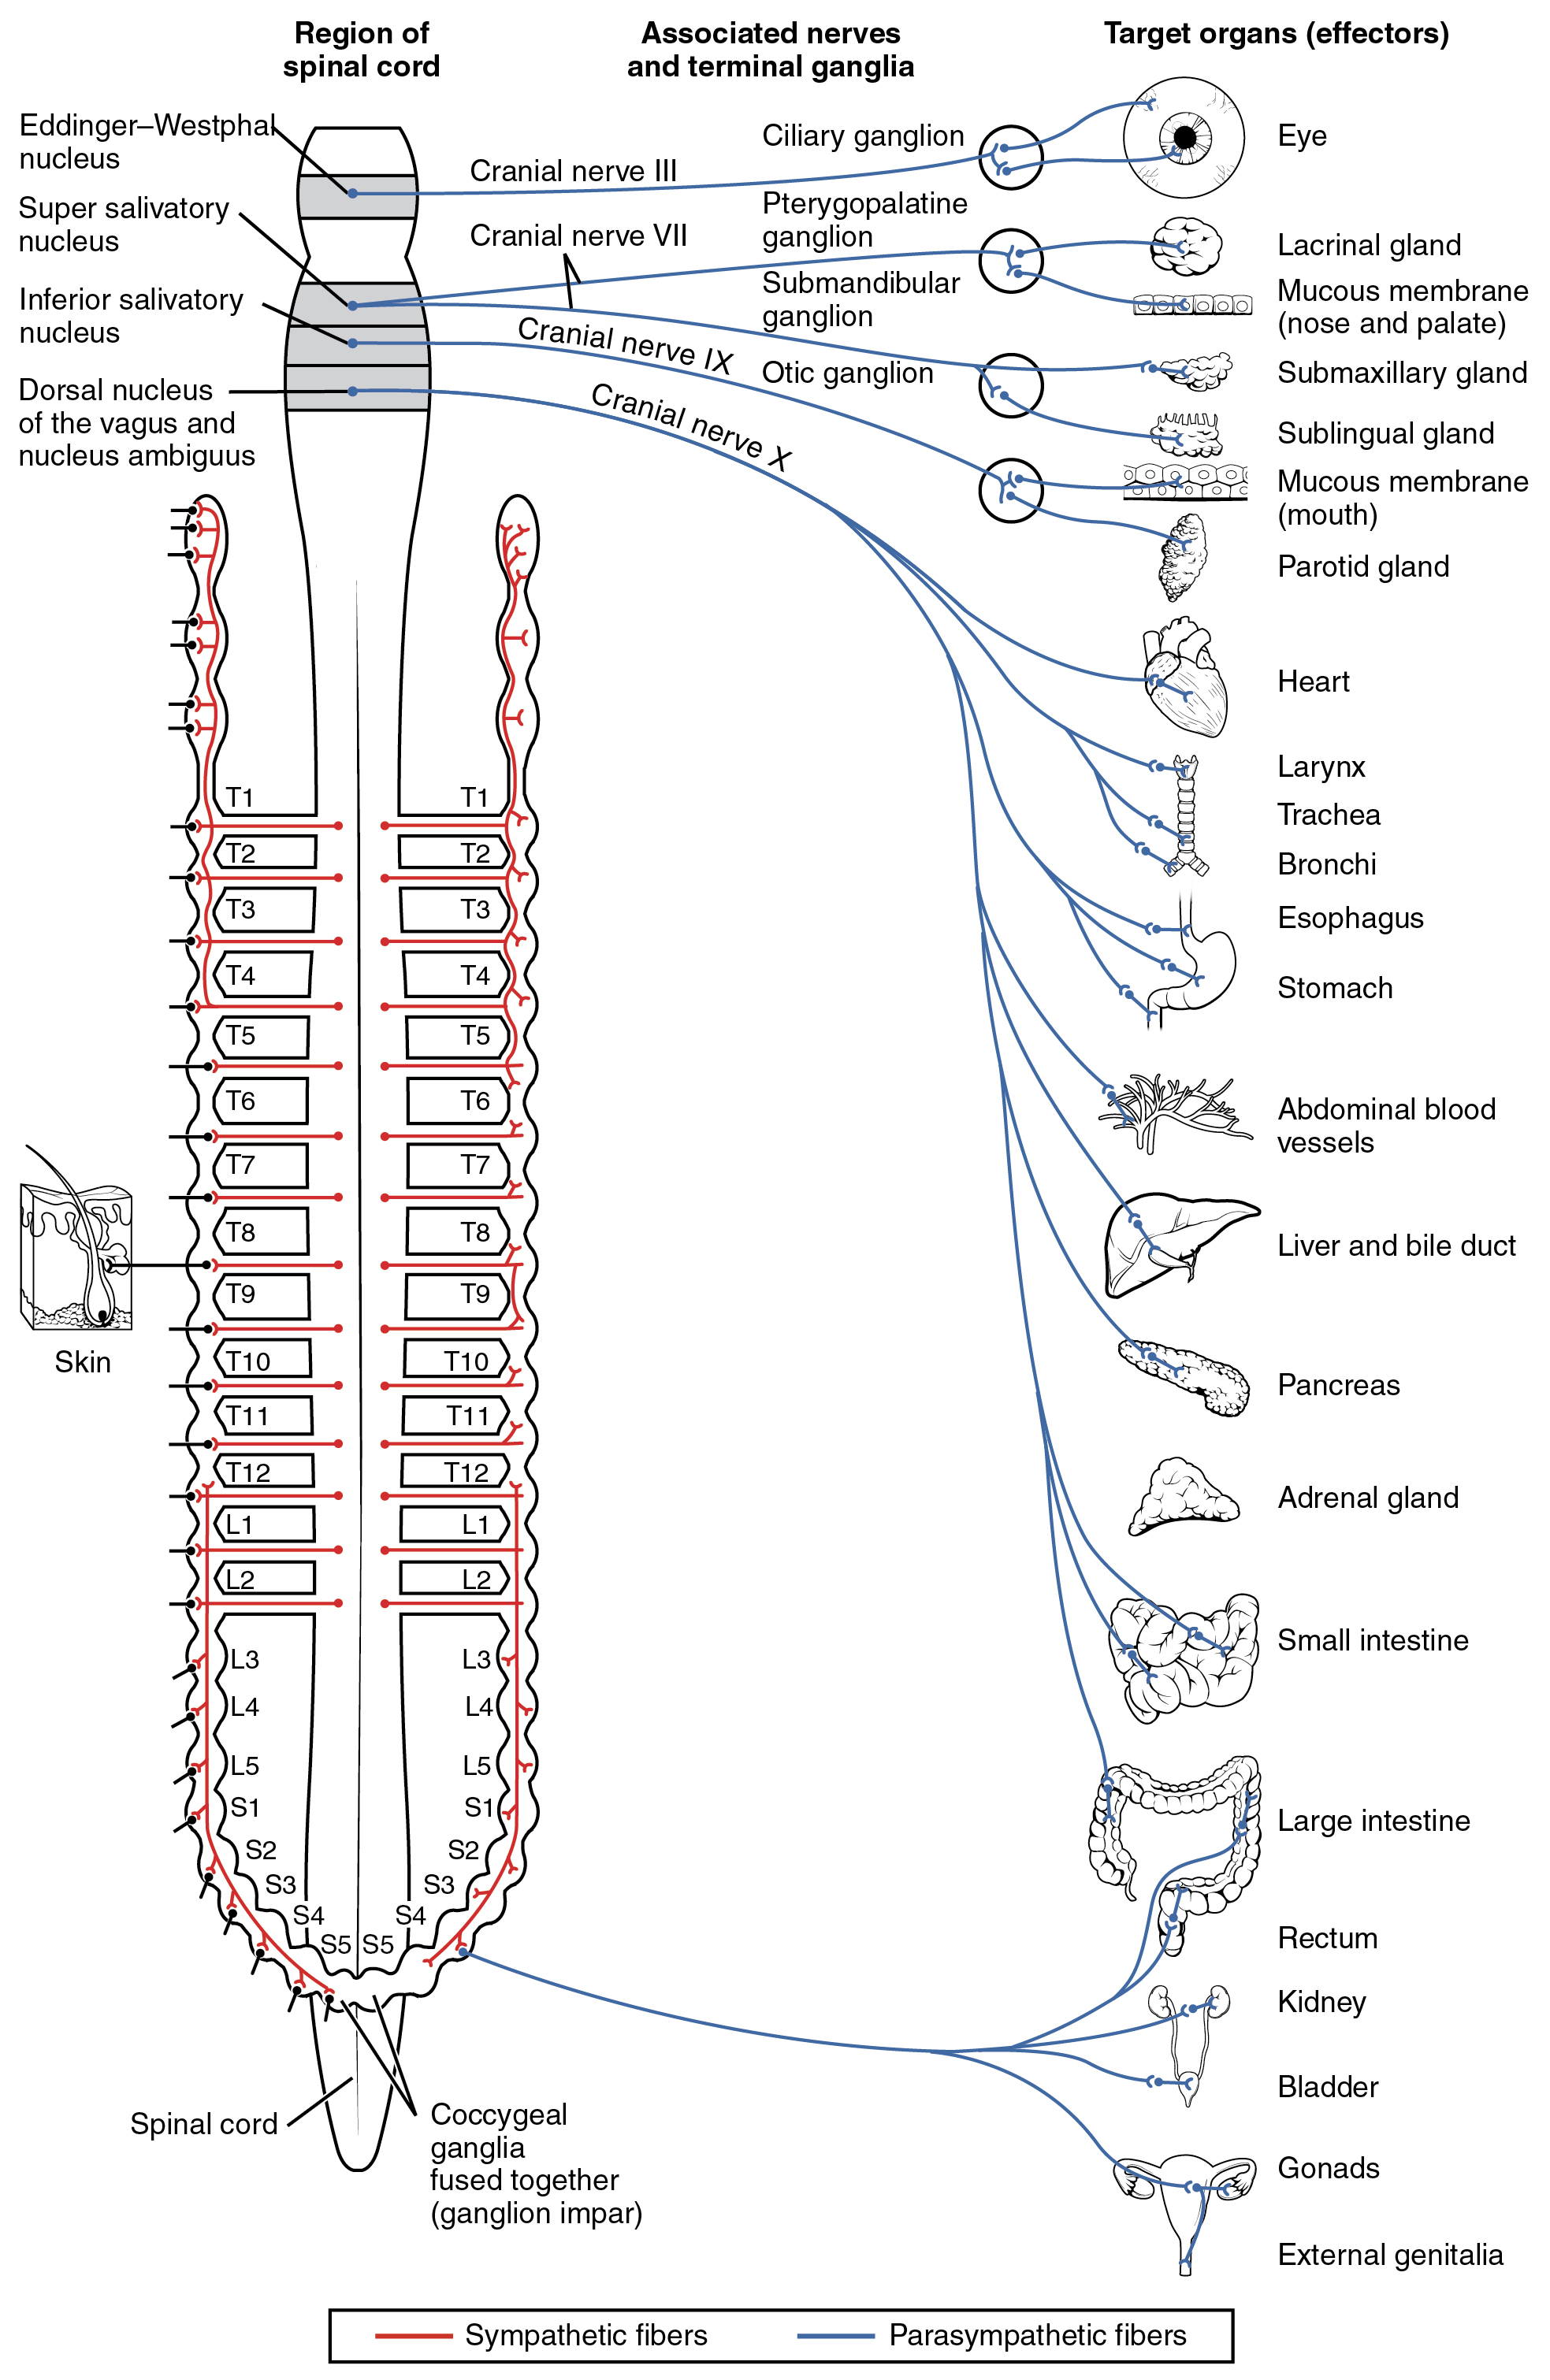 Connections of the Parasympathetic Nervous System